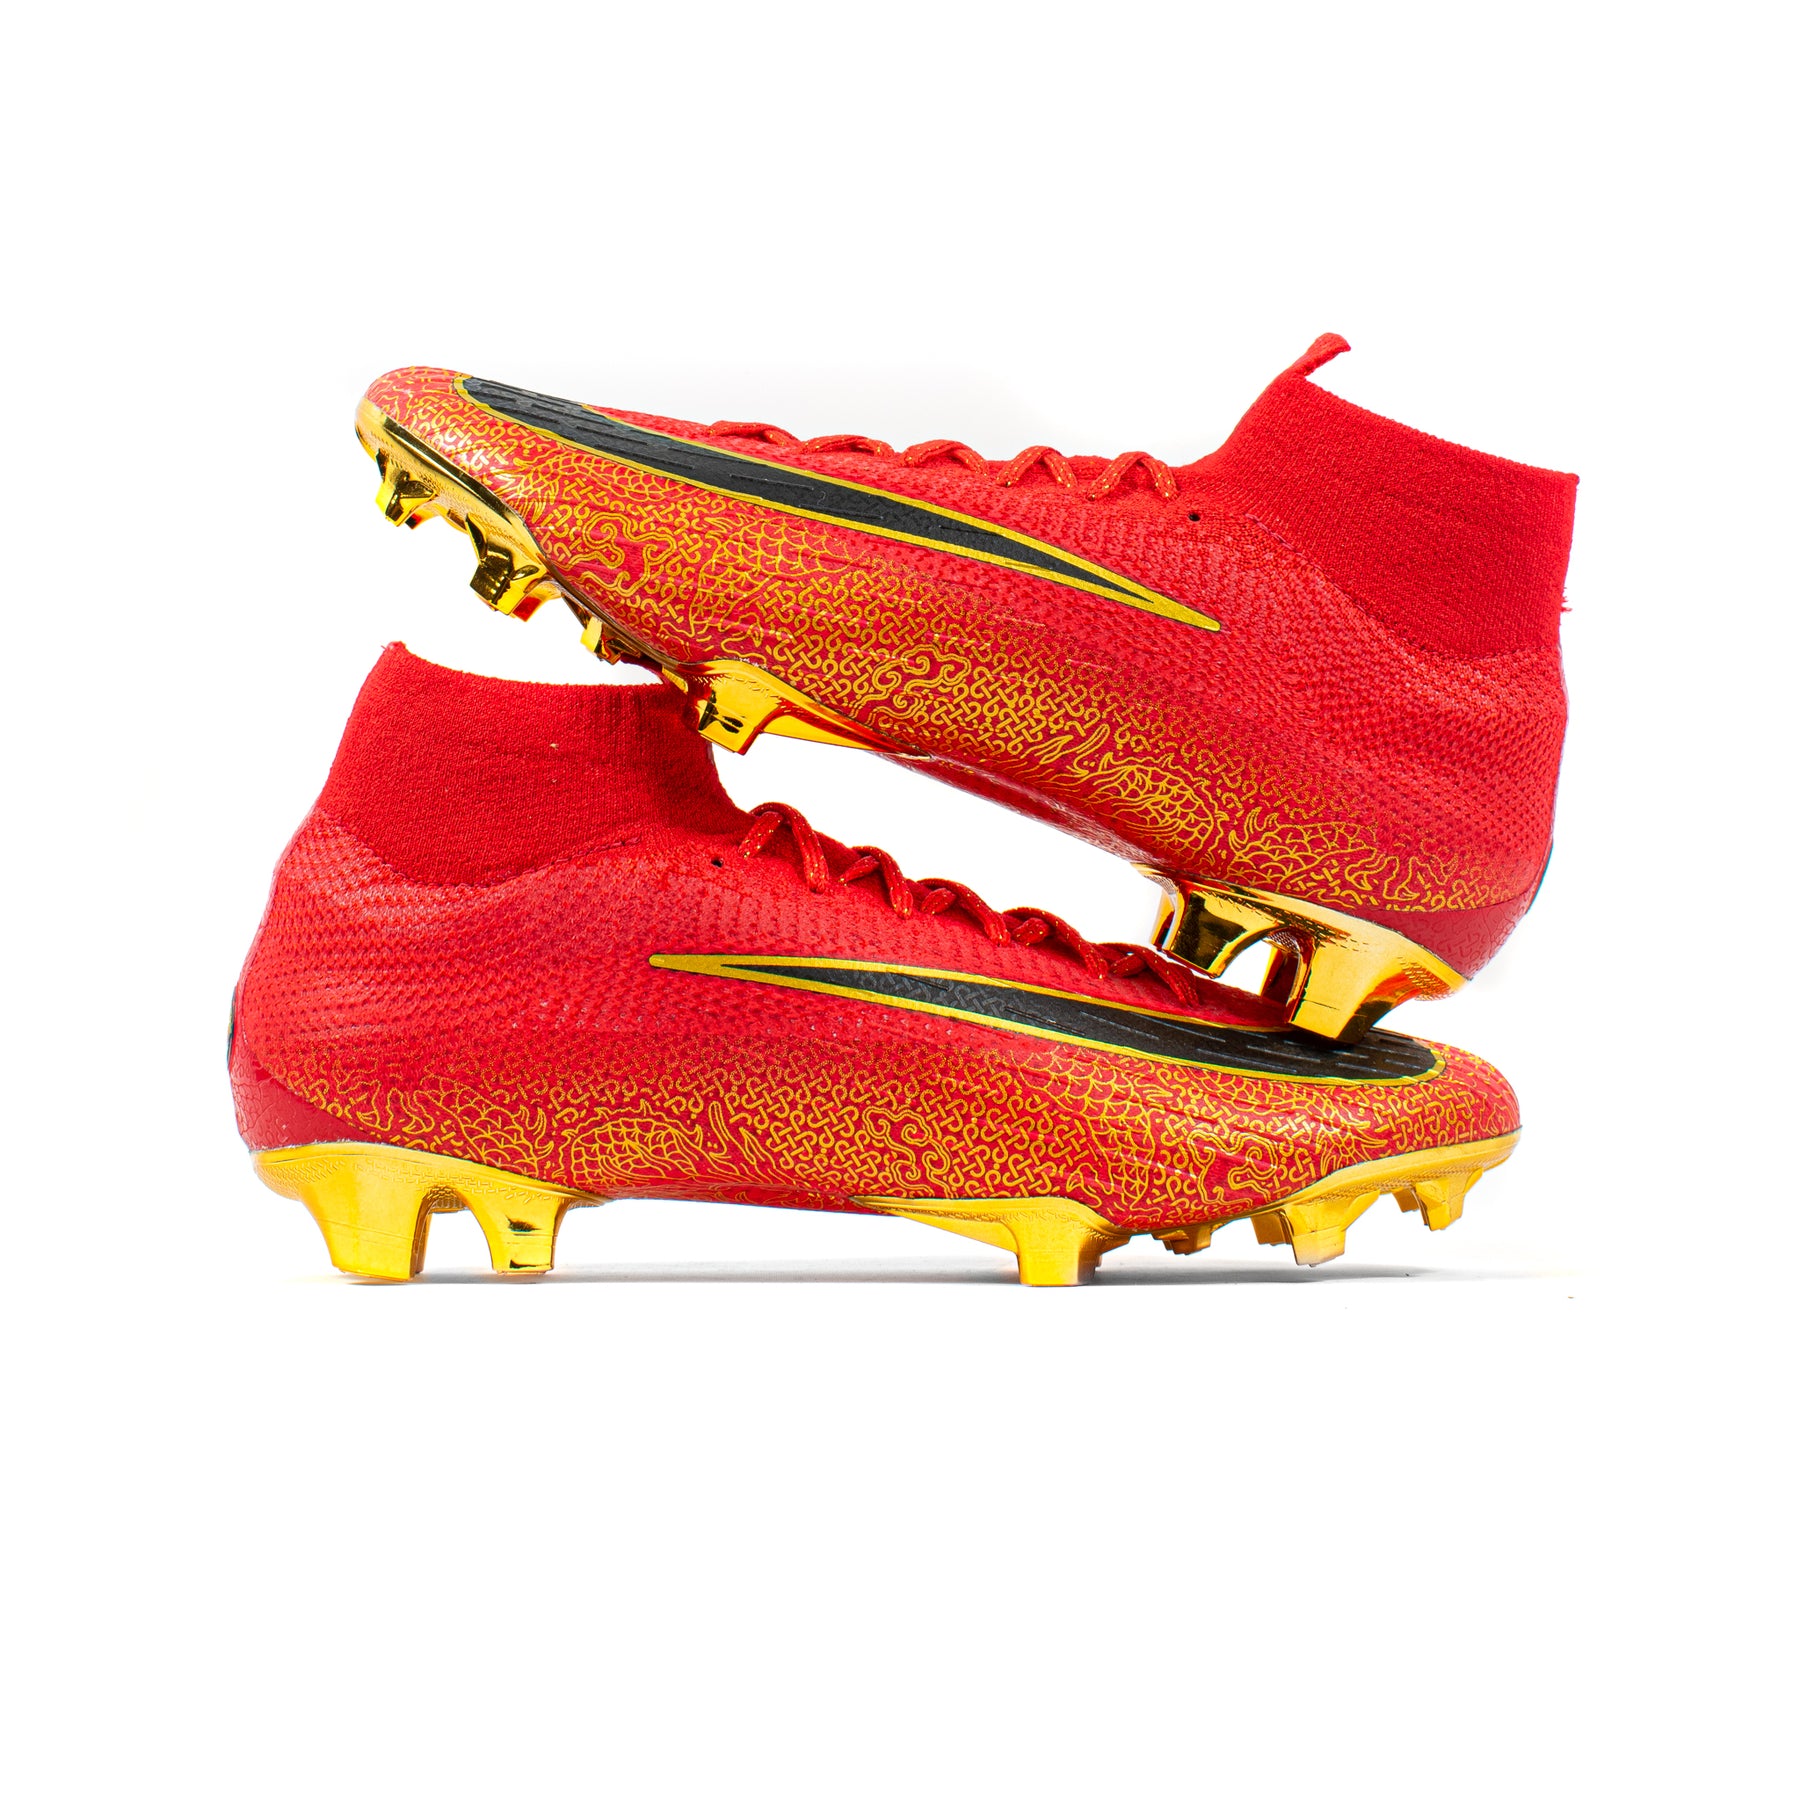 Mercurial Vapor Superfly 6 Elite China Red FG – Classic Soccer Cleats